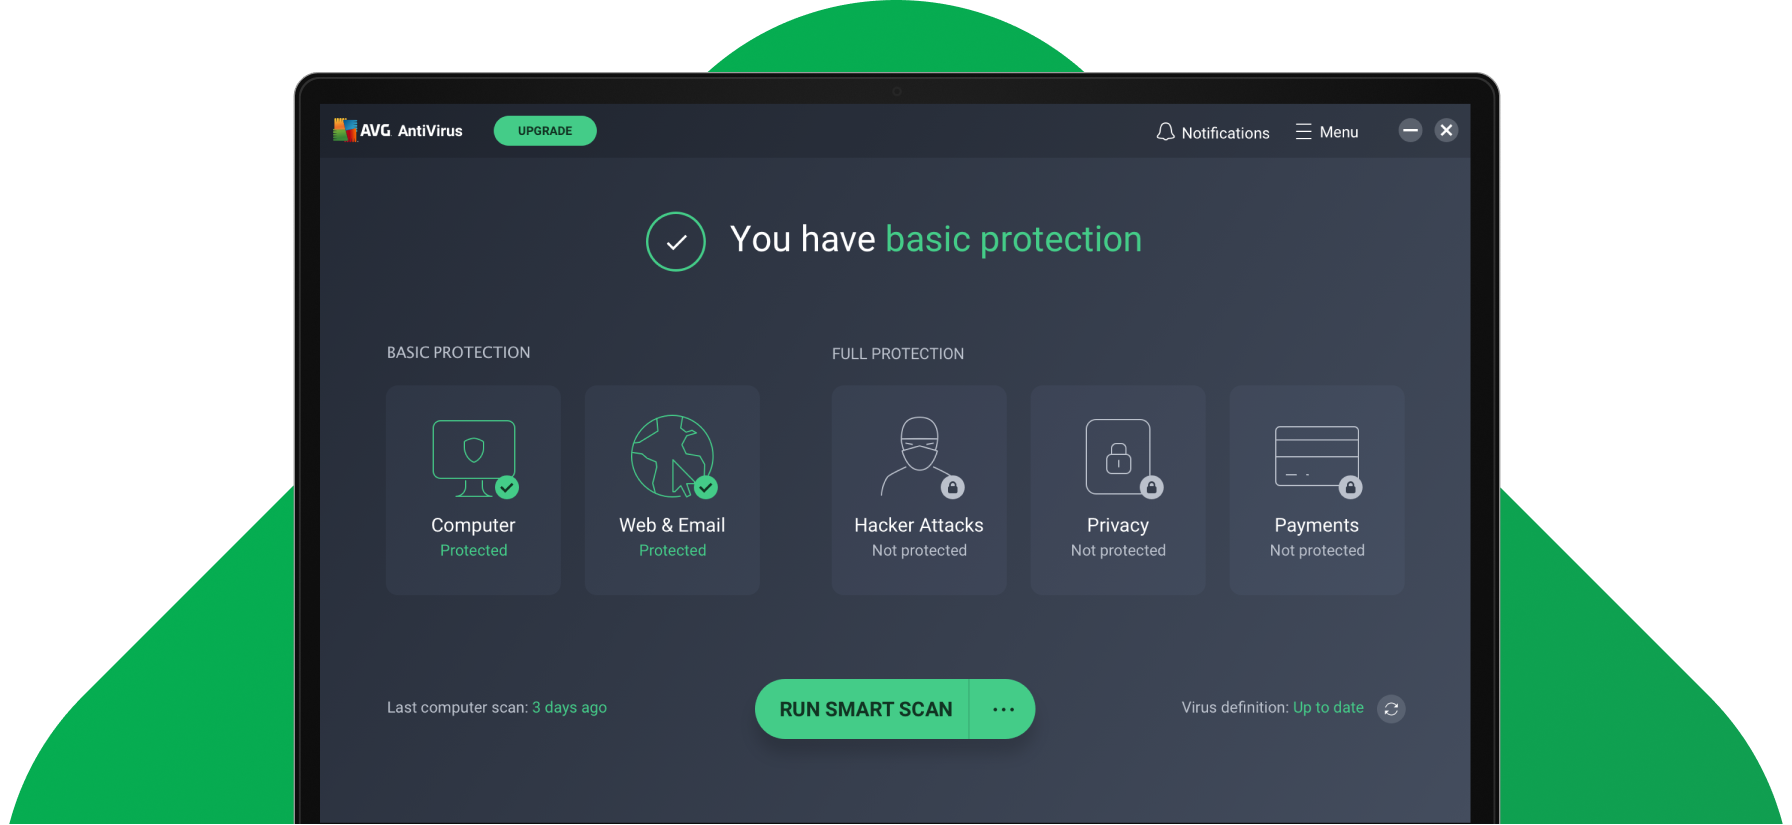 Download and install a compatible antivirus tool, such as Windows Defender or AVG Antivirus.
Run a full system scan to detect and remove any viruses or malware.